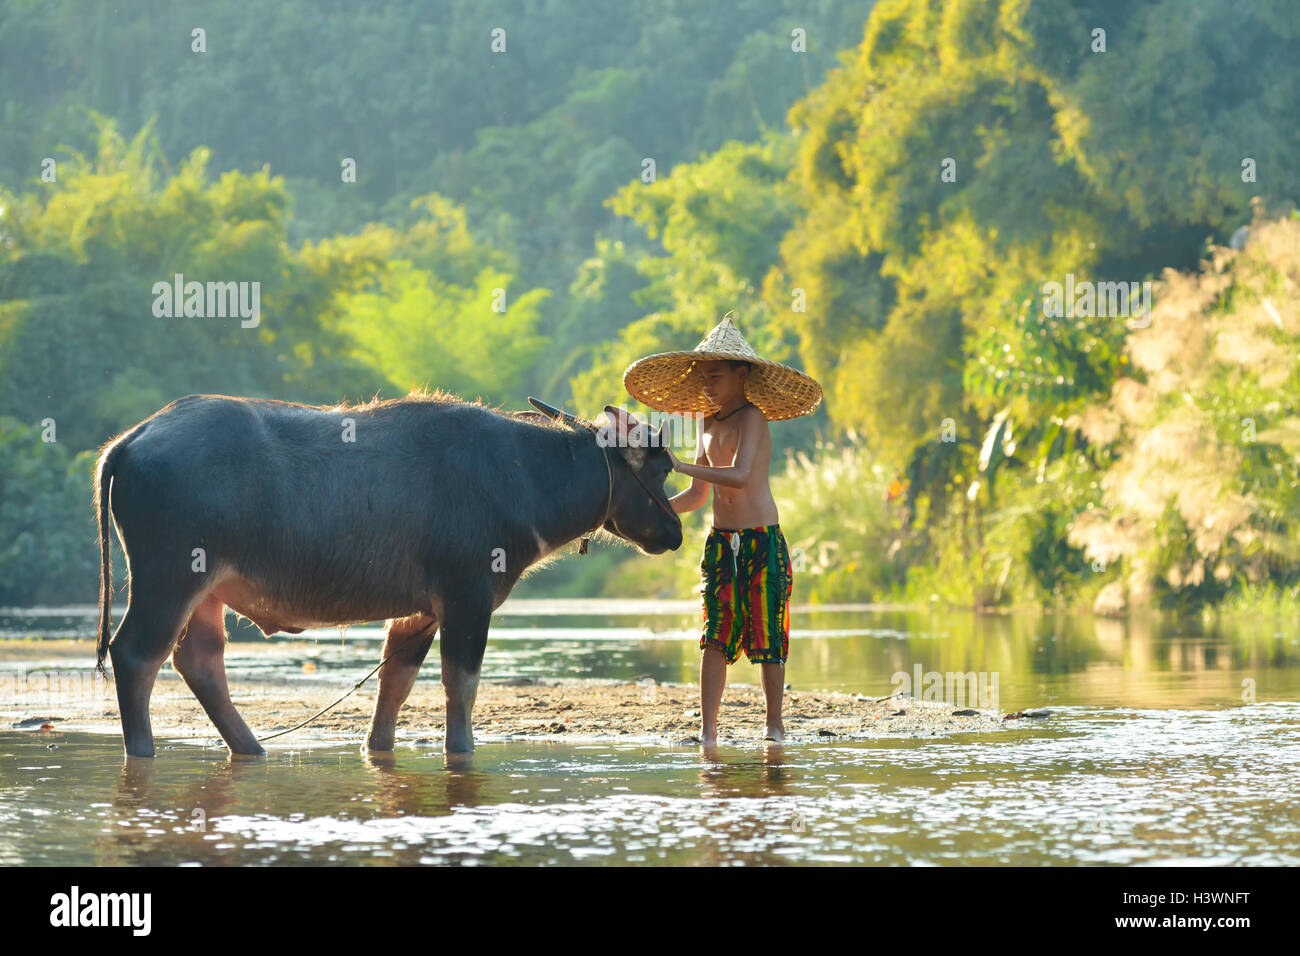 Boy standing in river with Buffalo, Thailand Stock Photo